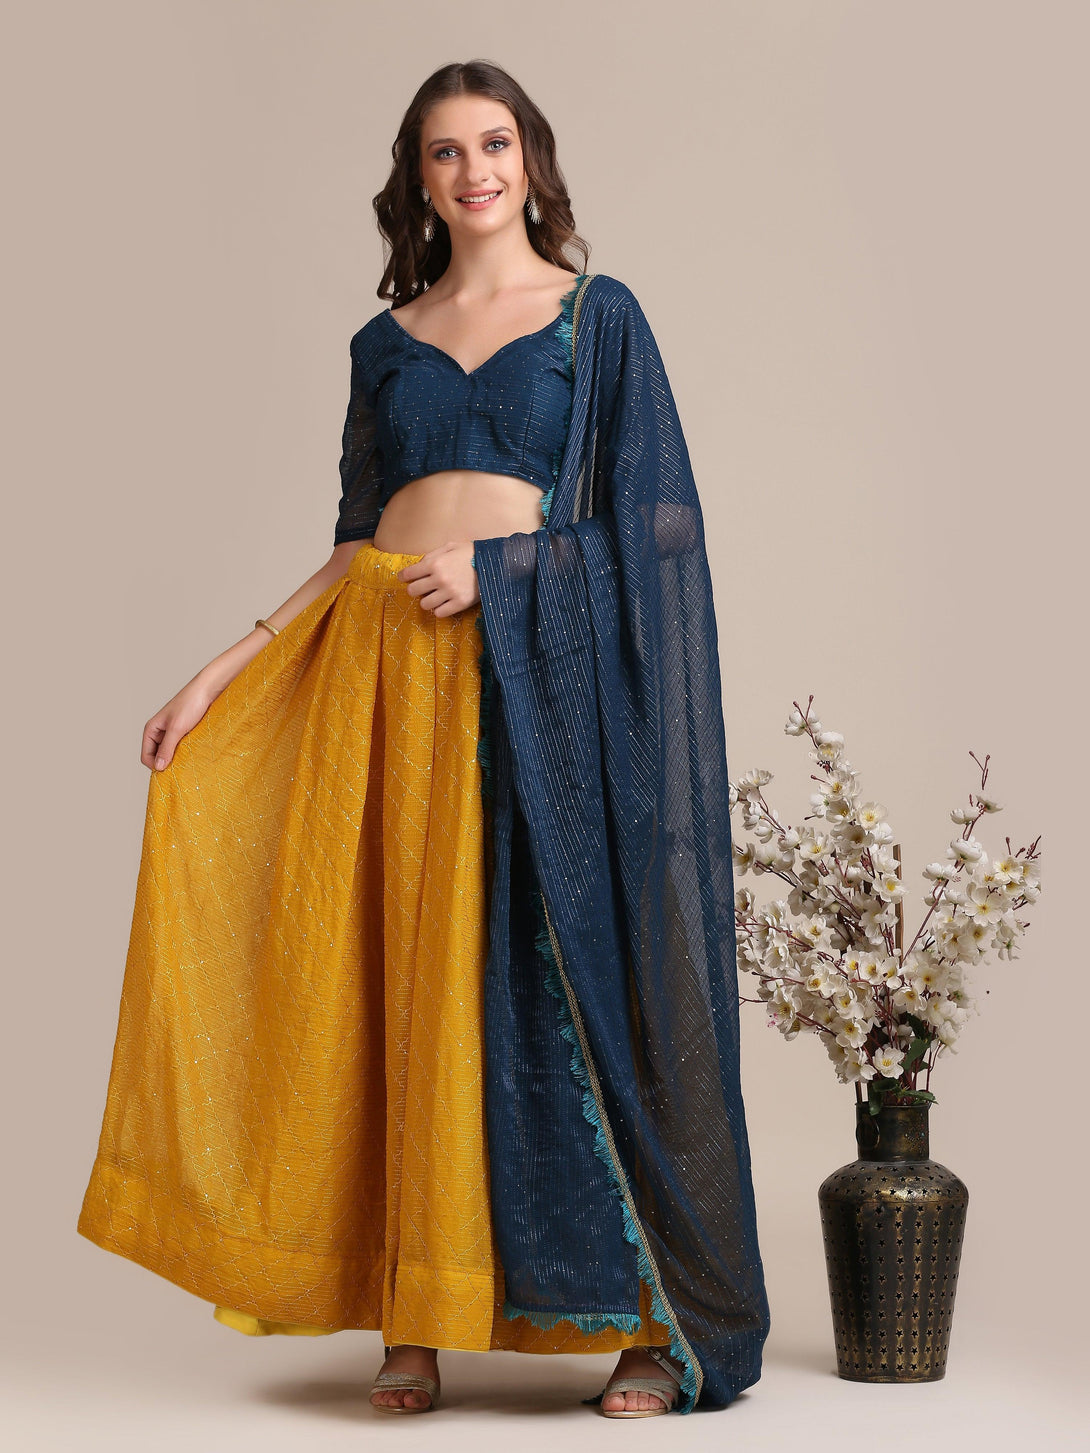 Yellow and Blue Georgette Lehenga Choli with Sequin Embroidery - Indiakreations